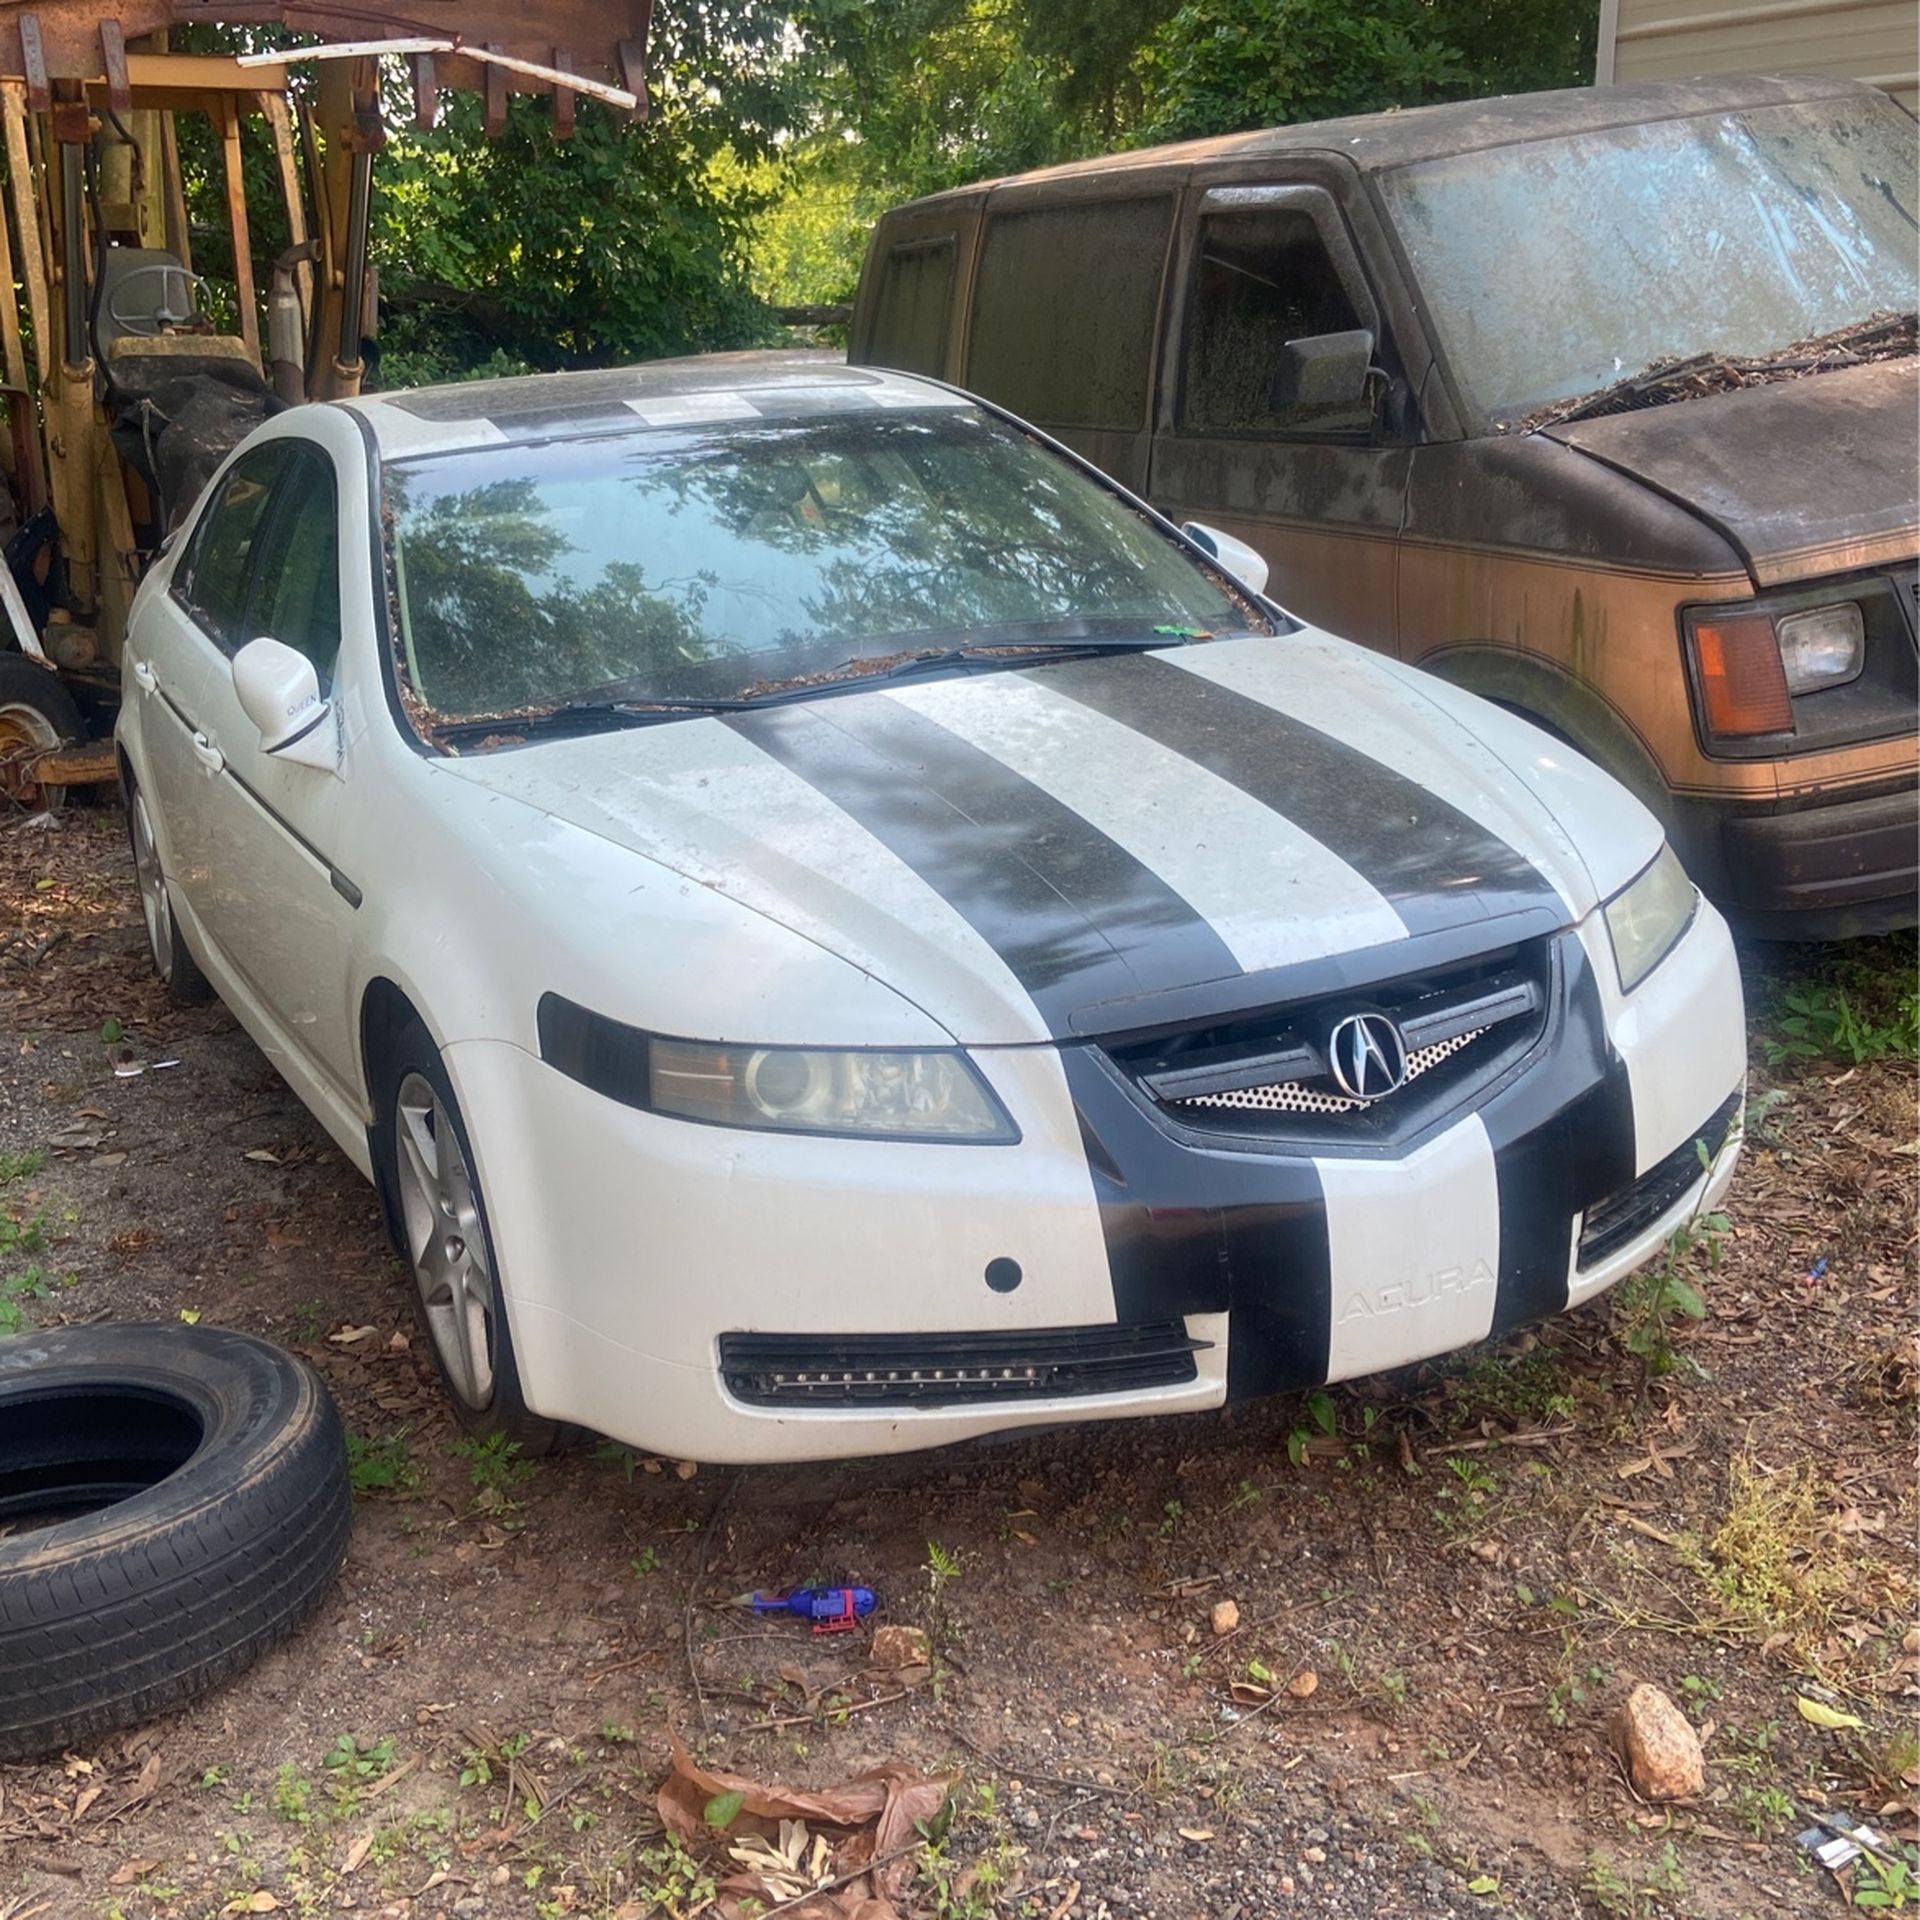 06 Acura TL 3.2L V6 Parts Or Whole,do have the Title 